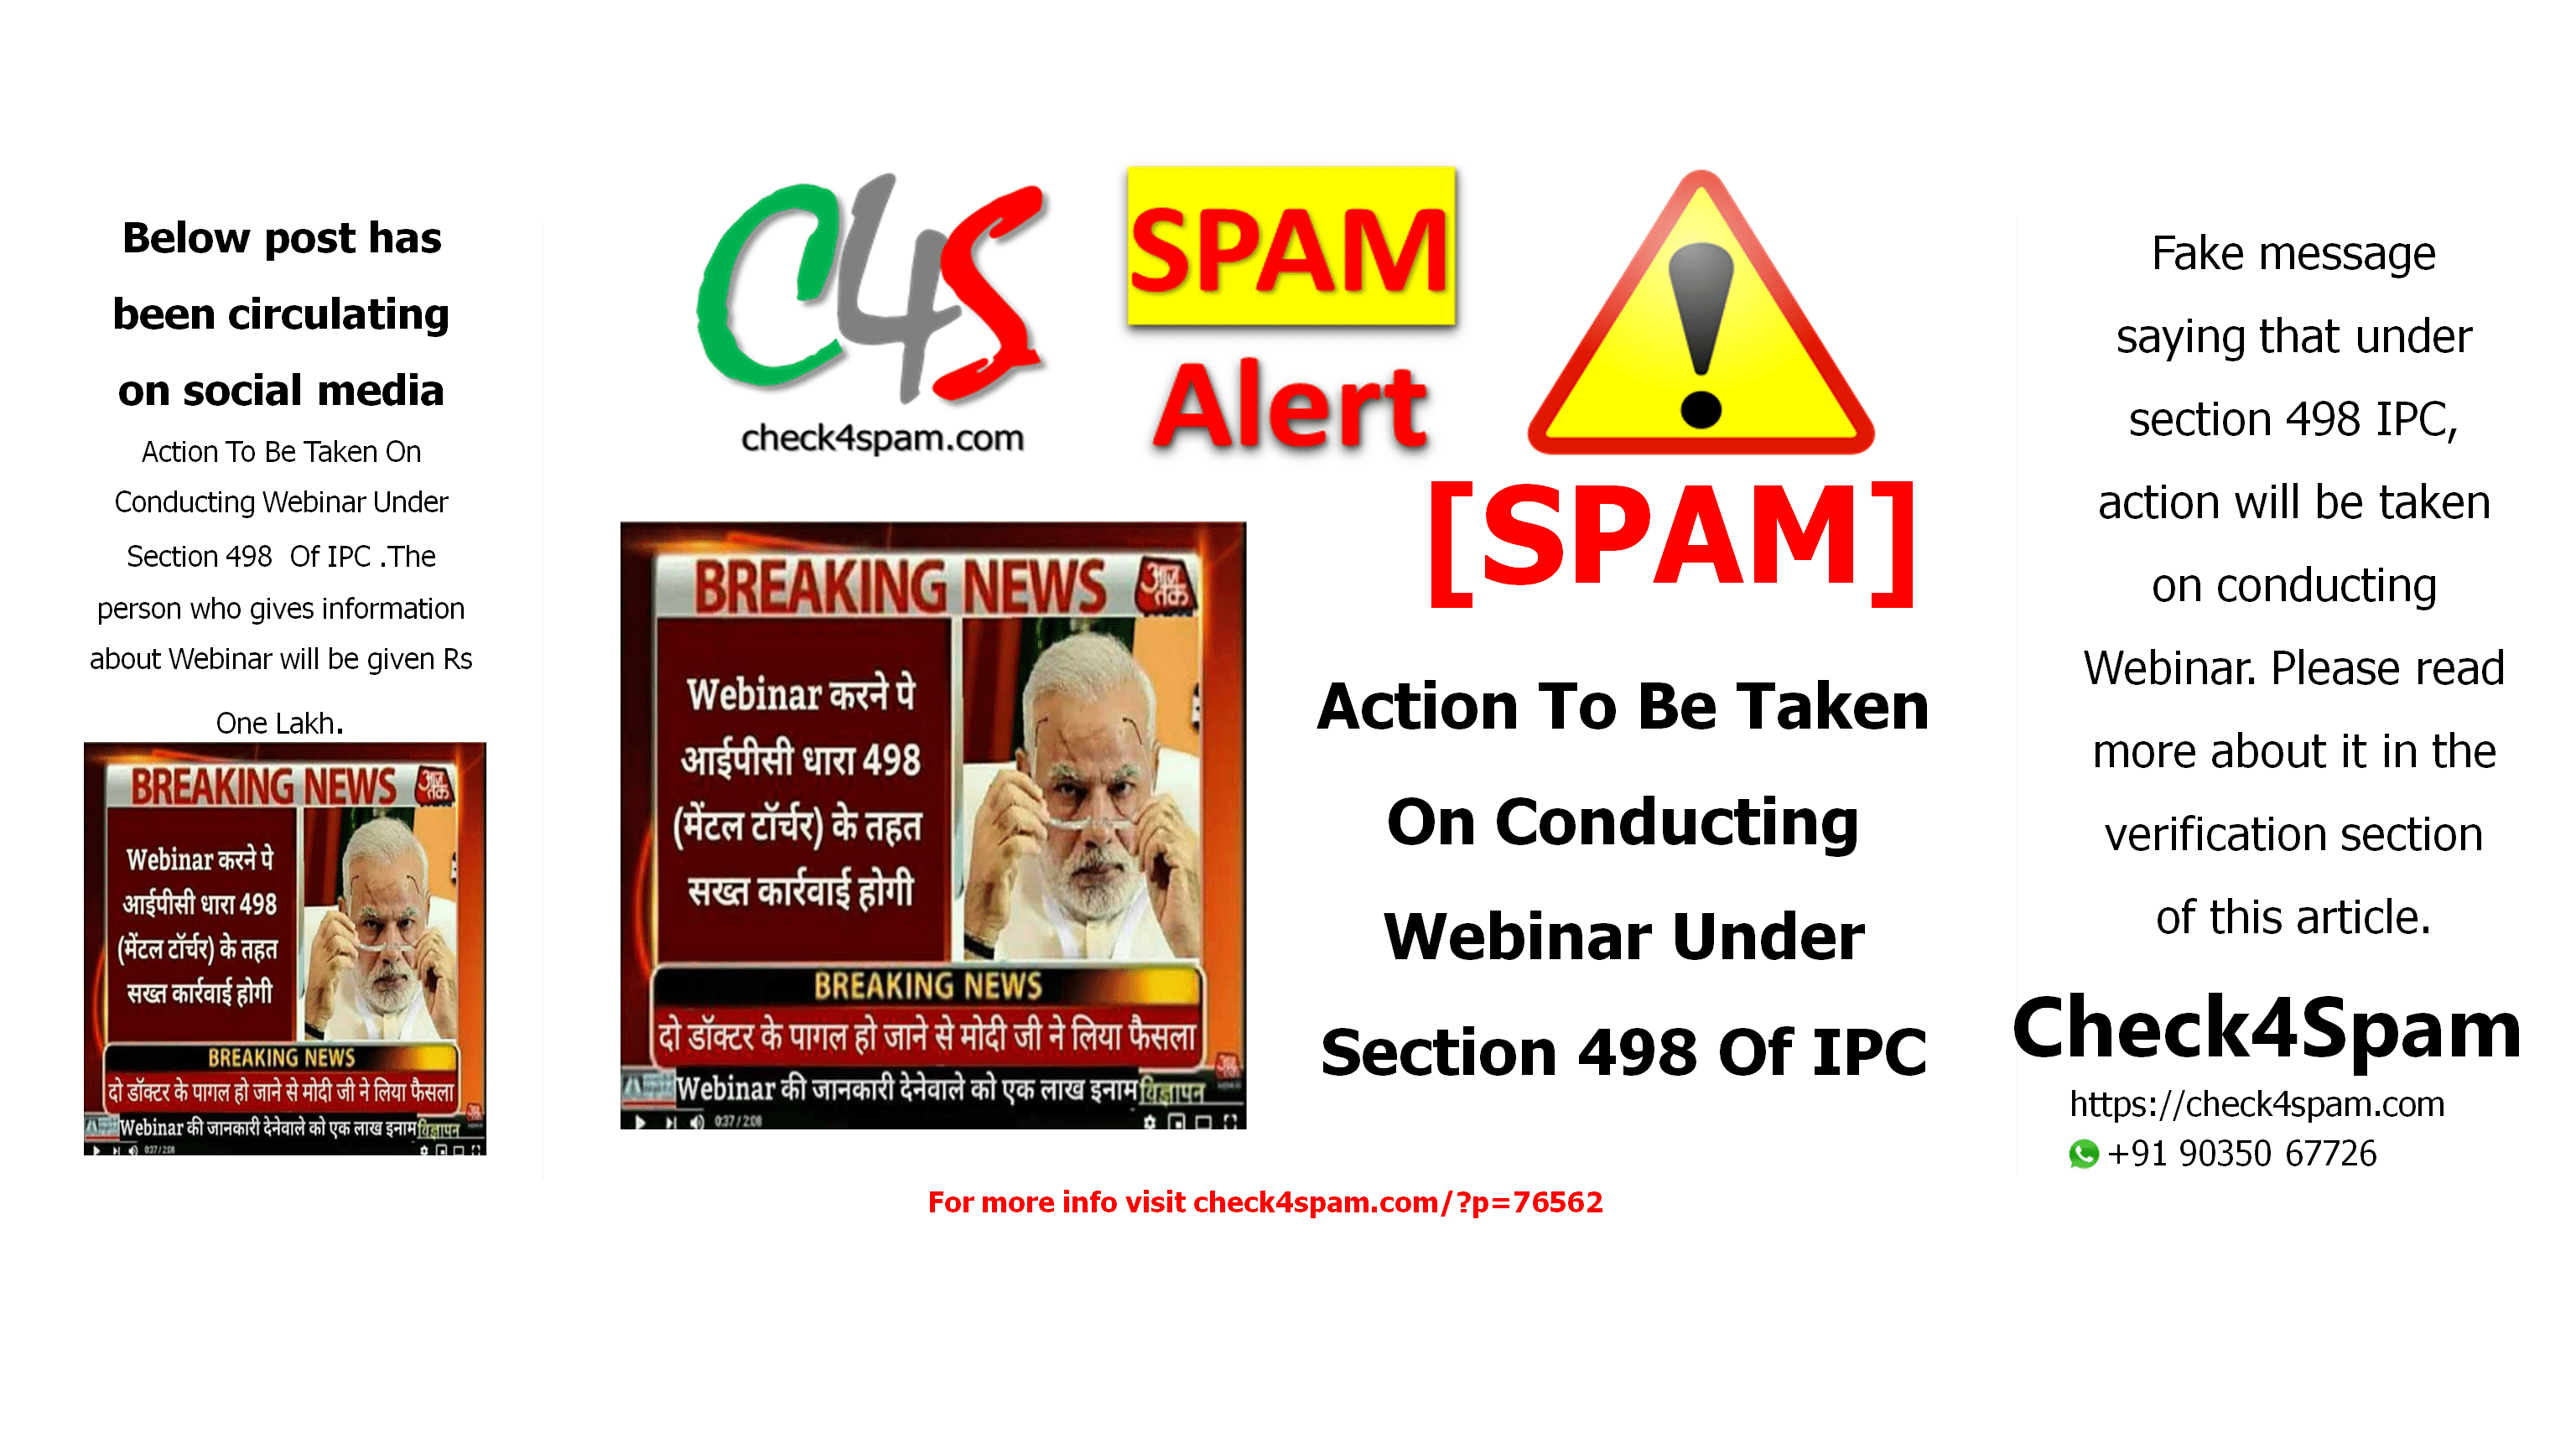 Action To Be Taken On Conducting Webinar Under Section 498 Of IPC